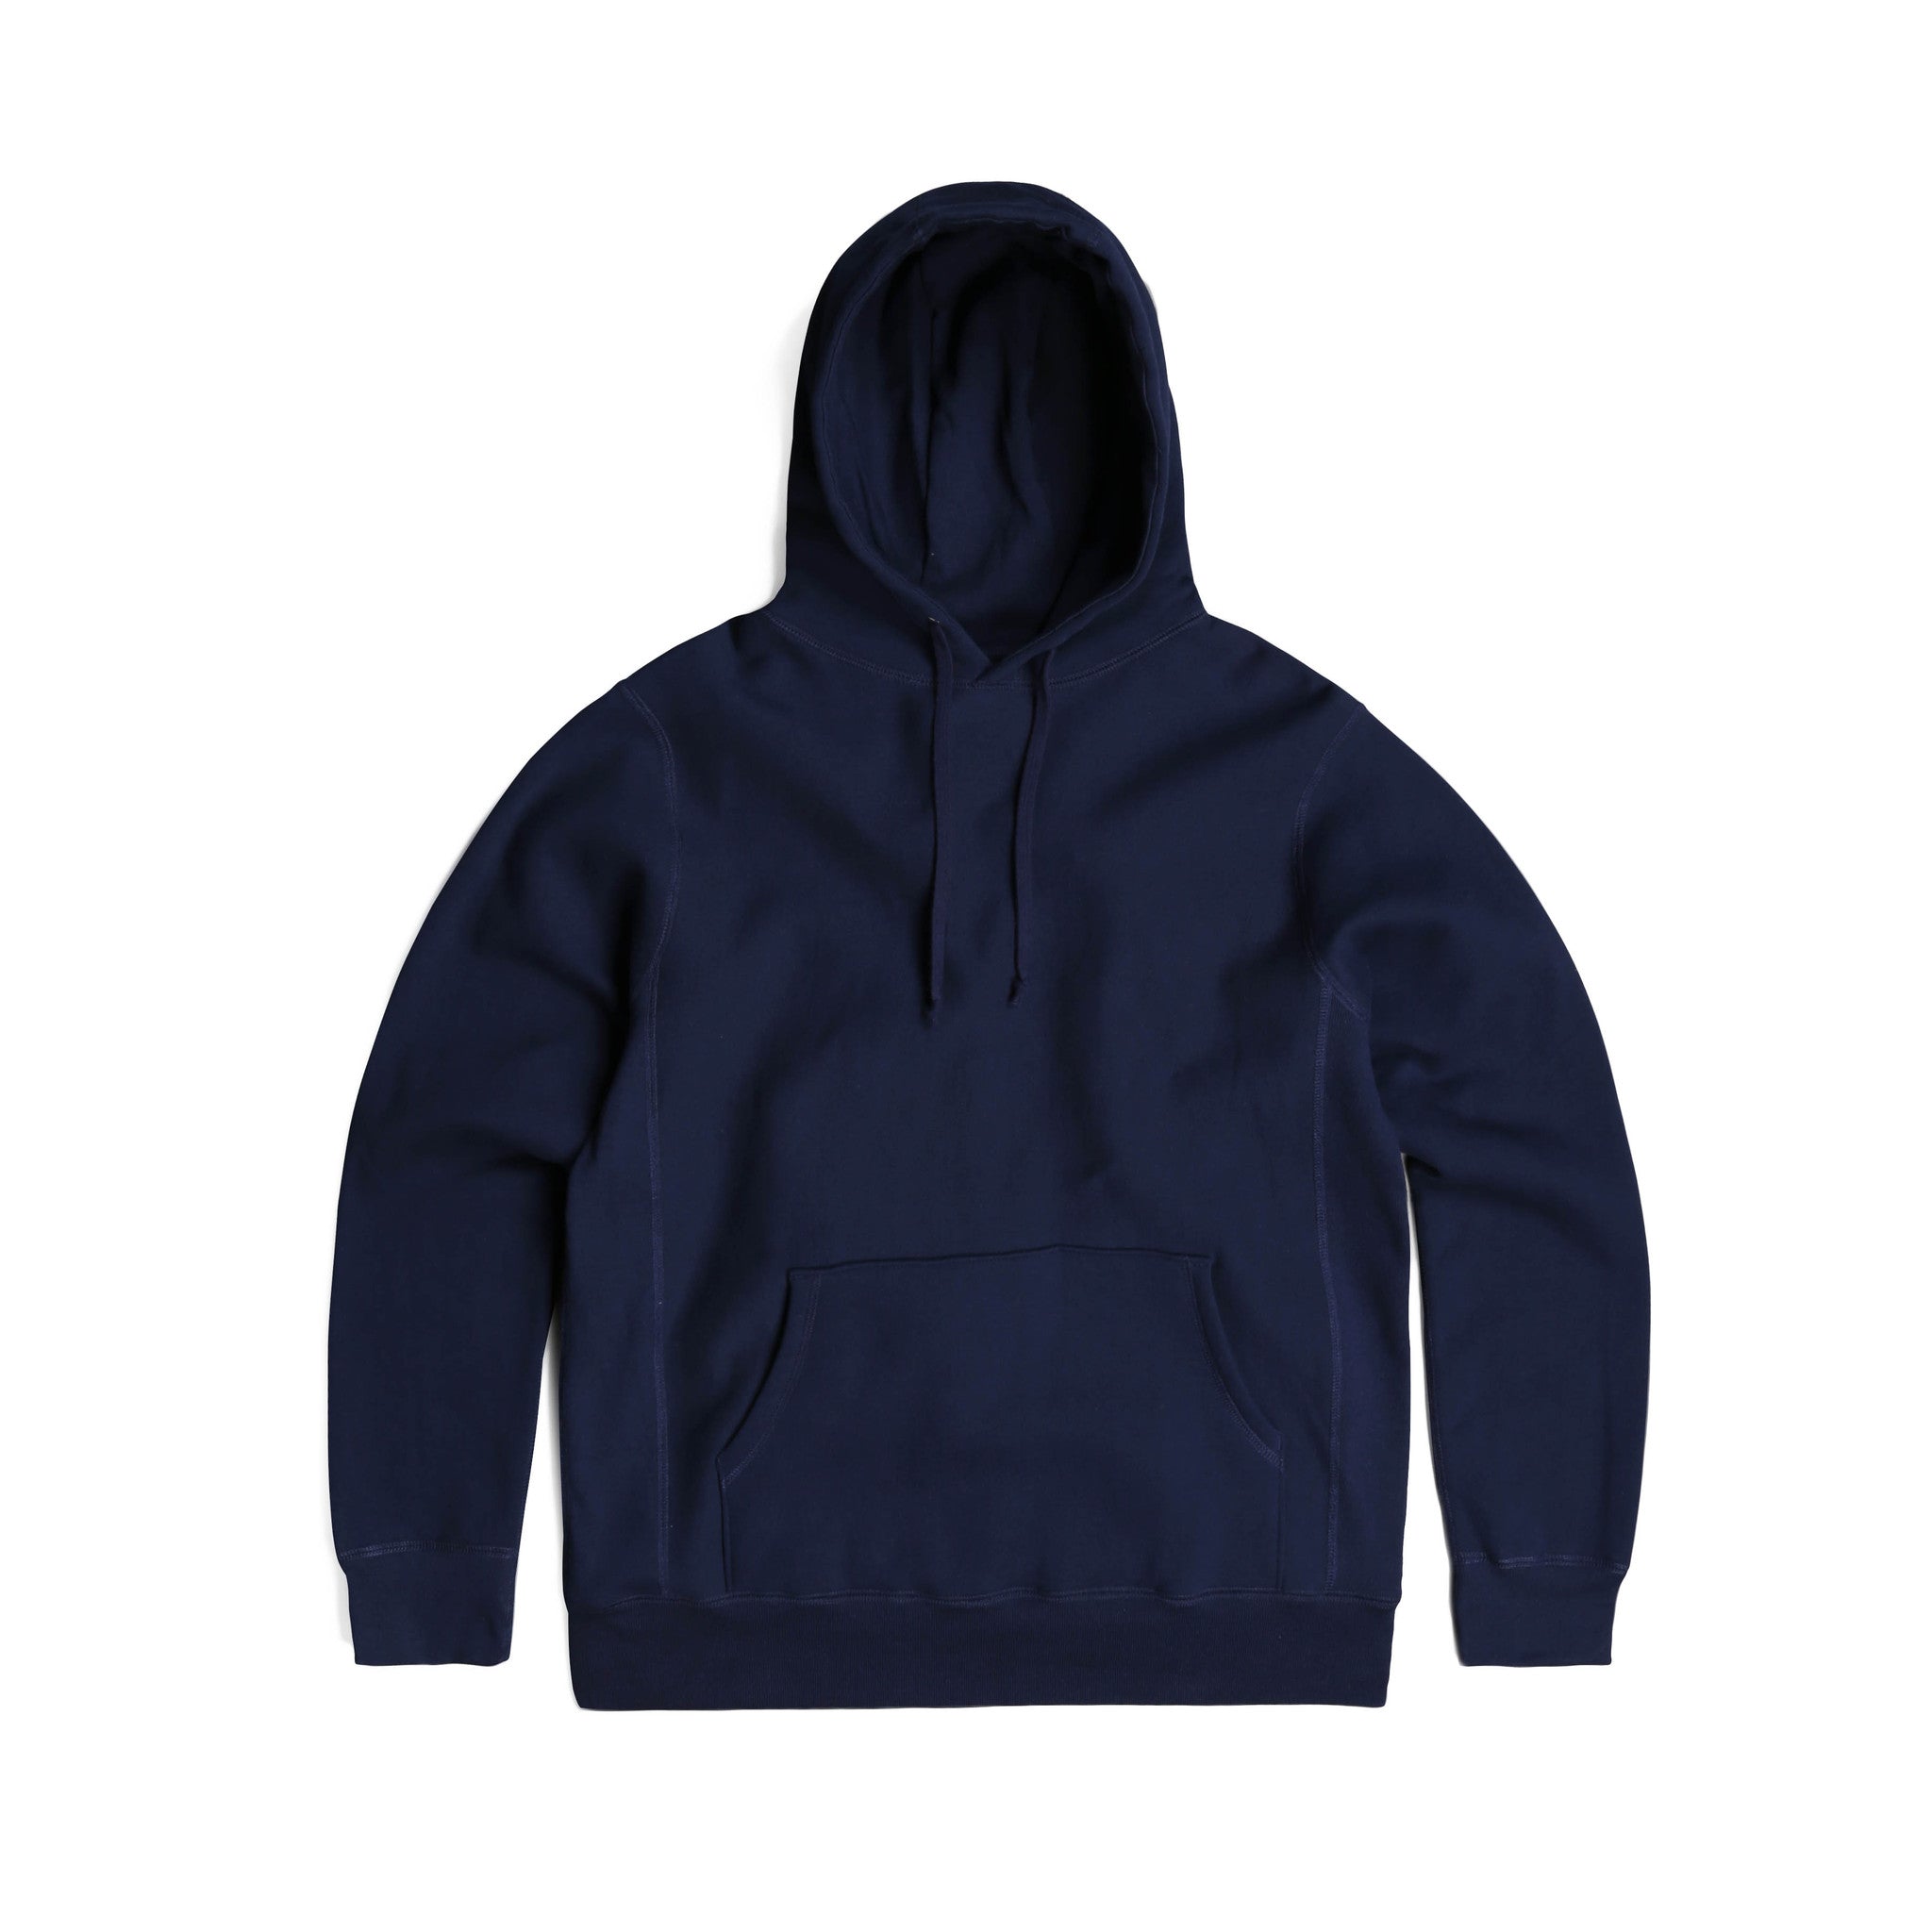 House of Blanks Pullover Hooded Sweatshirt XL / Navy